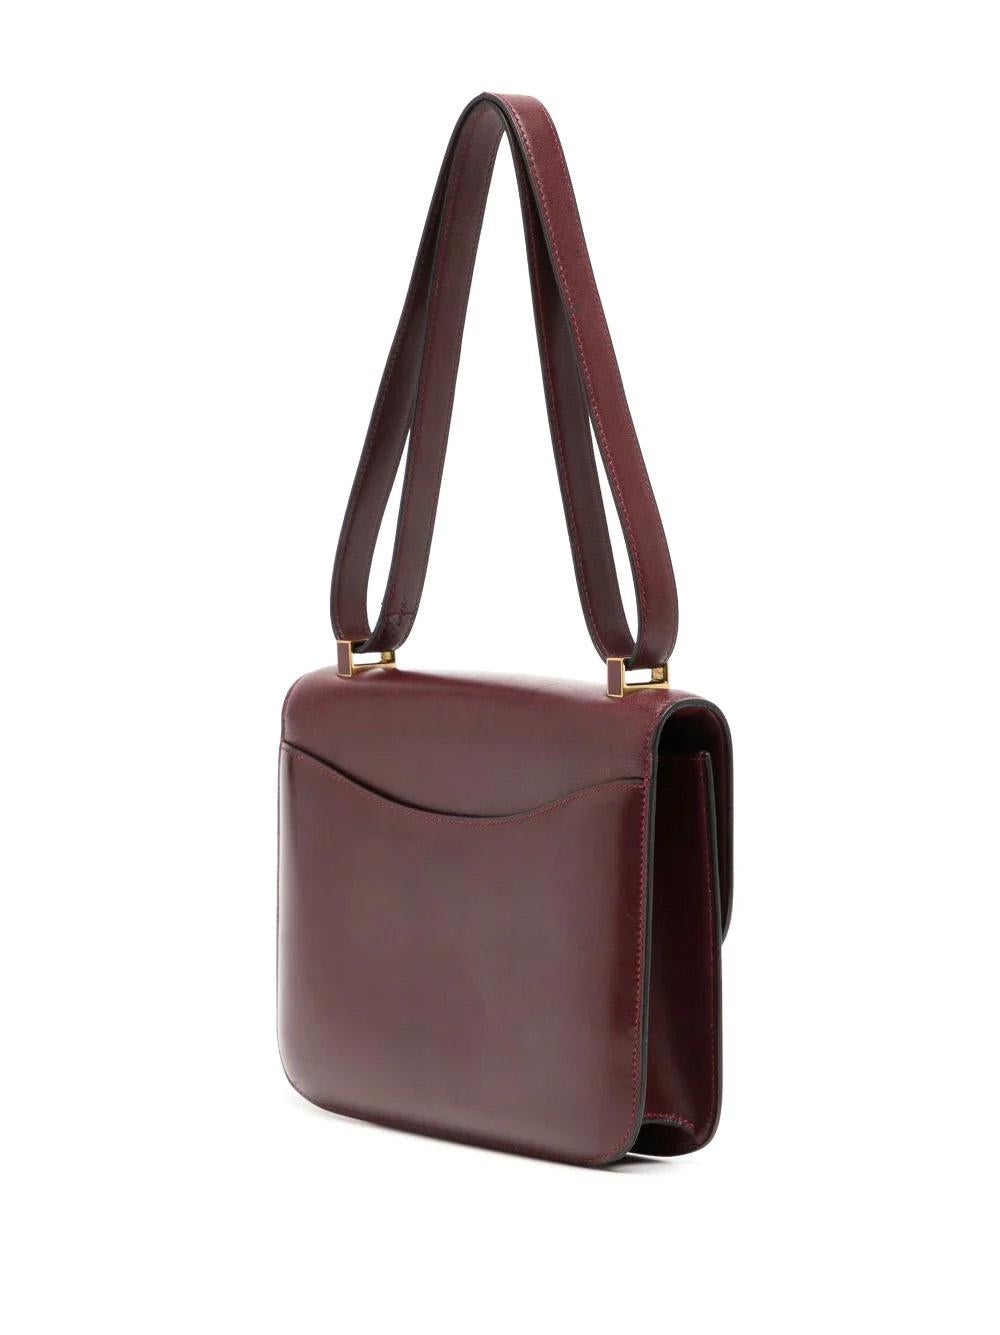 Crafted from deep burgundy box calf leather, the Burgundy Constance 24 cm bag is fashionably finished with a signature H push-lock fastening, internal zip-fastening pocket, tonal hardware and a single shoulder strap. Rest assured that all your